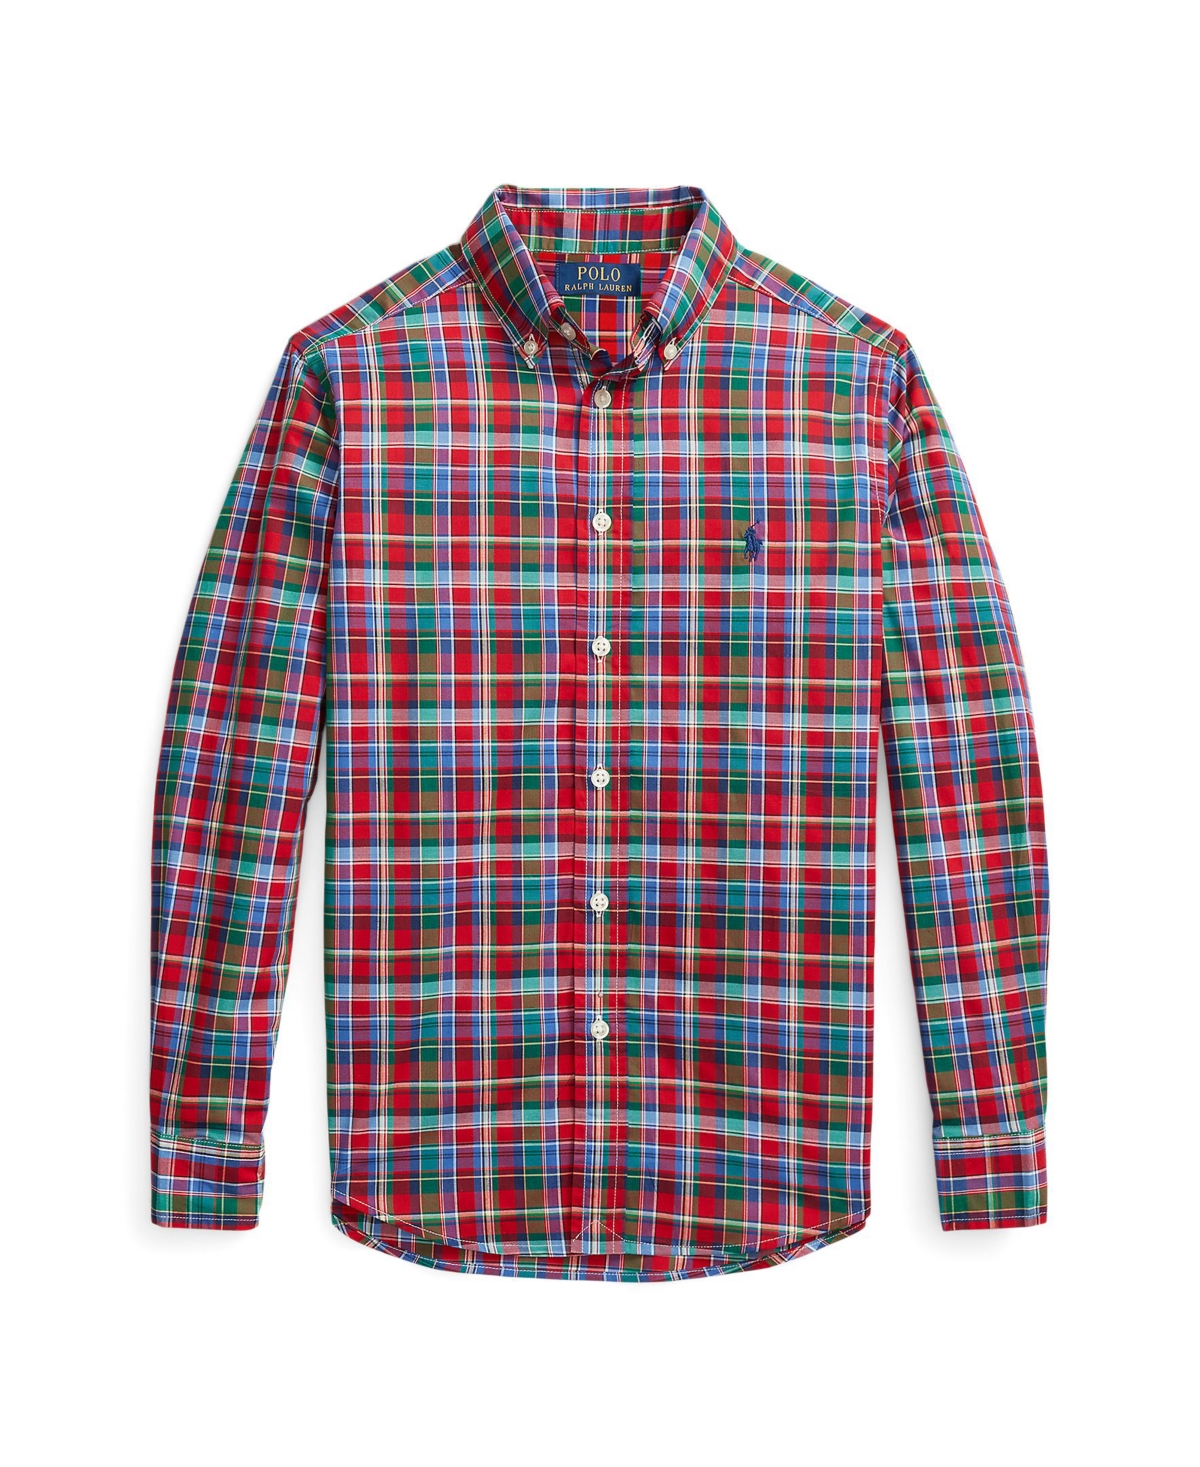 Polo Ralph Lauren Kids' Toddler And Little Boys Plaid Cotton Poplin Shirt In Red,green Multi